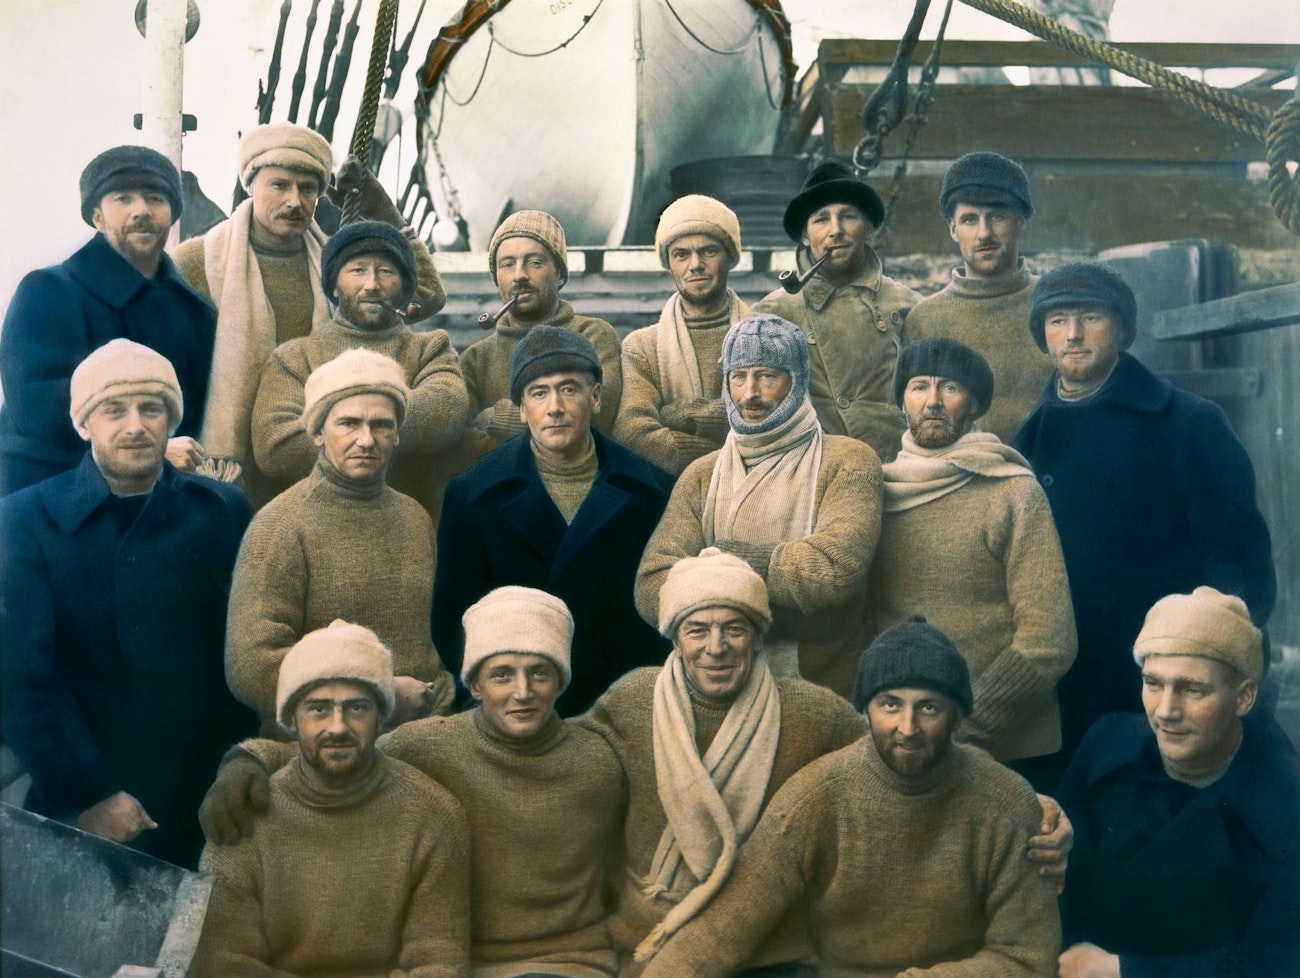 <em>Hand-tinted photograph of members of the British, Australian, and New Zealand Antarctic Research Expedition (BANZARE) of 1929–1931. Sir Douglas Mawson, the only one wearing a balaclava, is in the second row, third from right.</em>